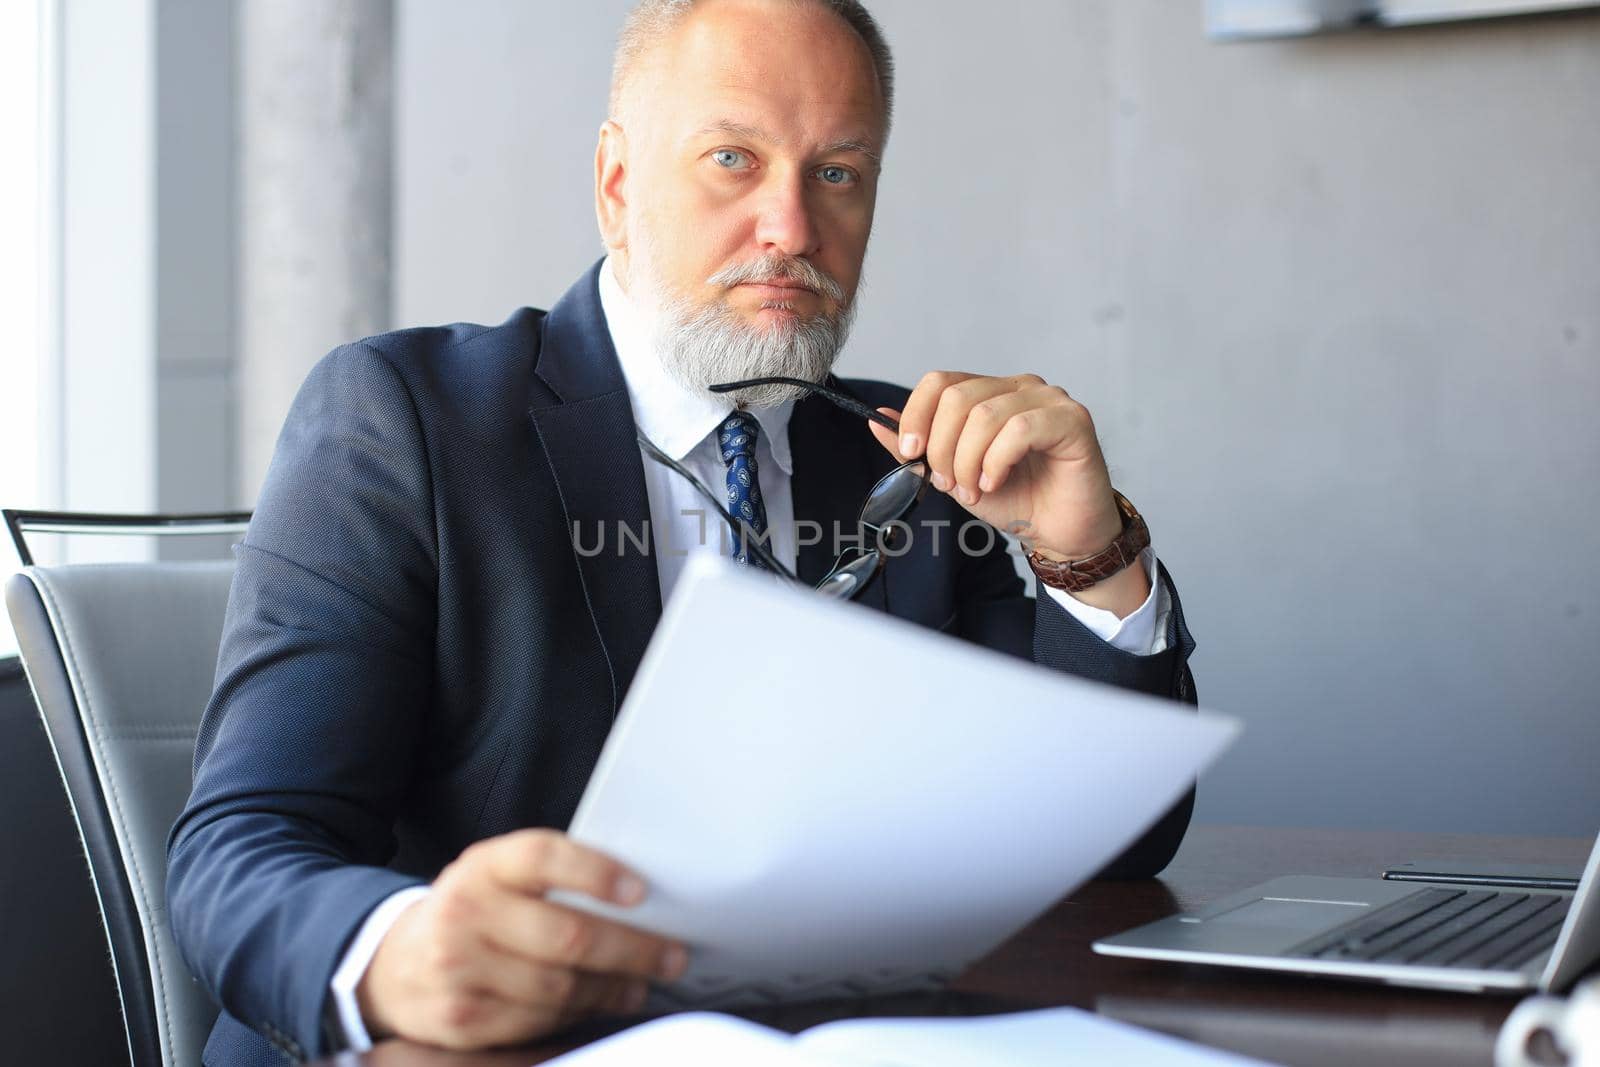 Mature business man in full suit holding his eyeglasses and looking at camera while sitting at the desk in office